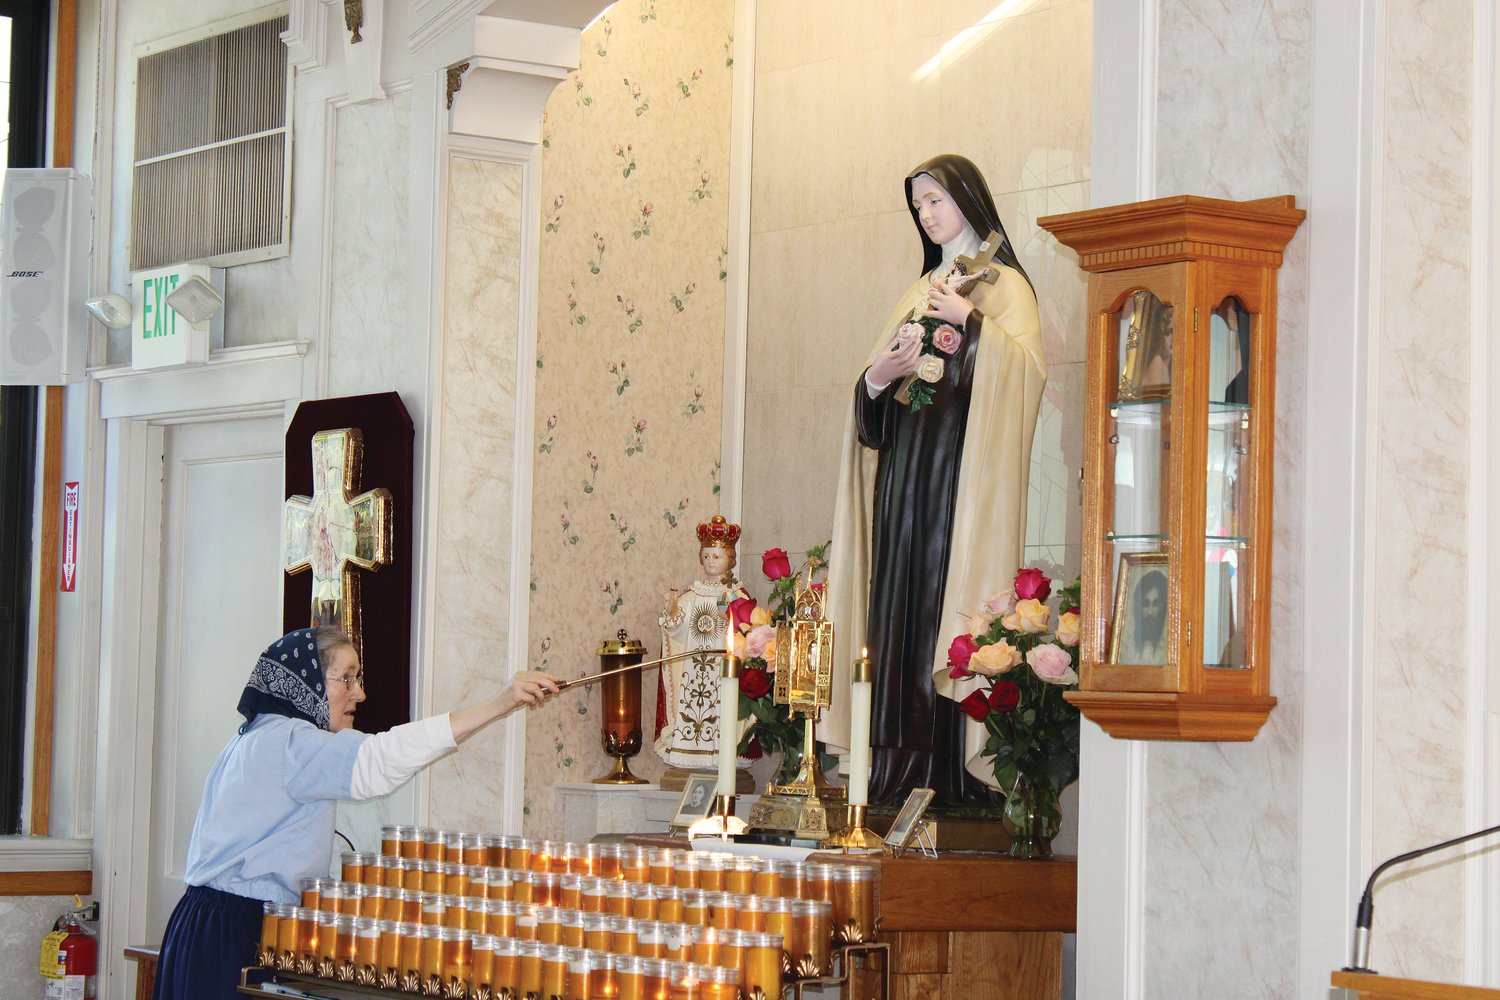 The Shrine of the Little Flower celebrated it’s 99th Anniversary Day on Sunday, Aug. 21. The day included Mass with Auxiliary Bishop Robert C. Evans as celebrant. Additional devotions included a living Rosary, Stations of the Cross, and Eucharistic Adoration throughout the day.